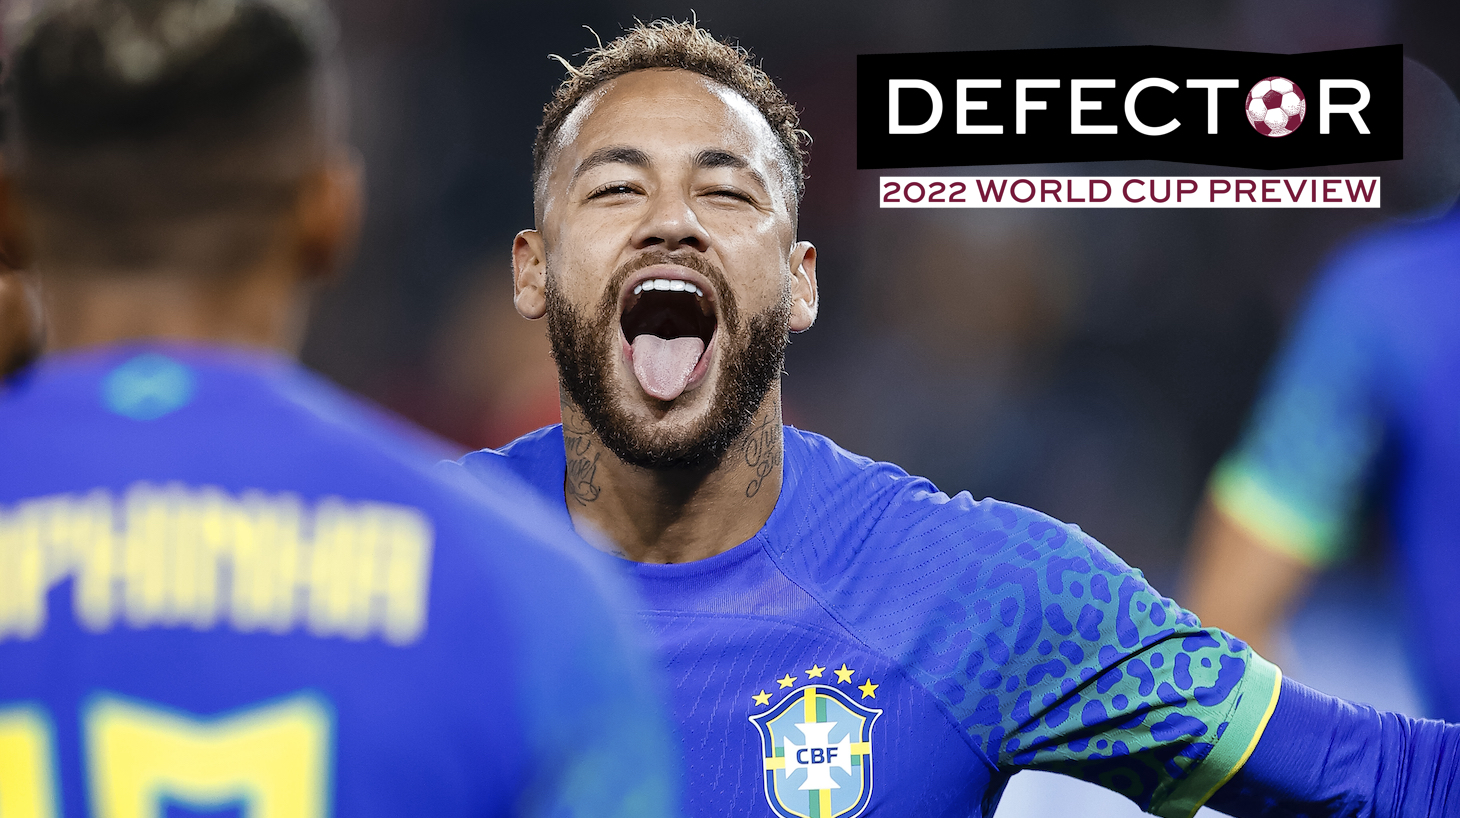 Neymar Junior of Brazil celebrates his goal during the international friendly match between Brazil and Tunisia at Parc des Princes on September 27, 2022 in Paris, France.